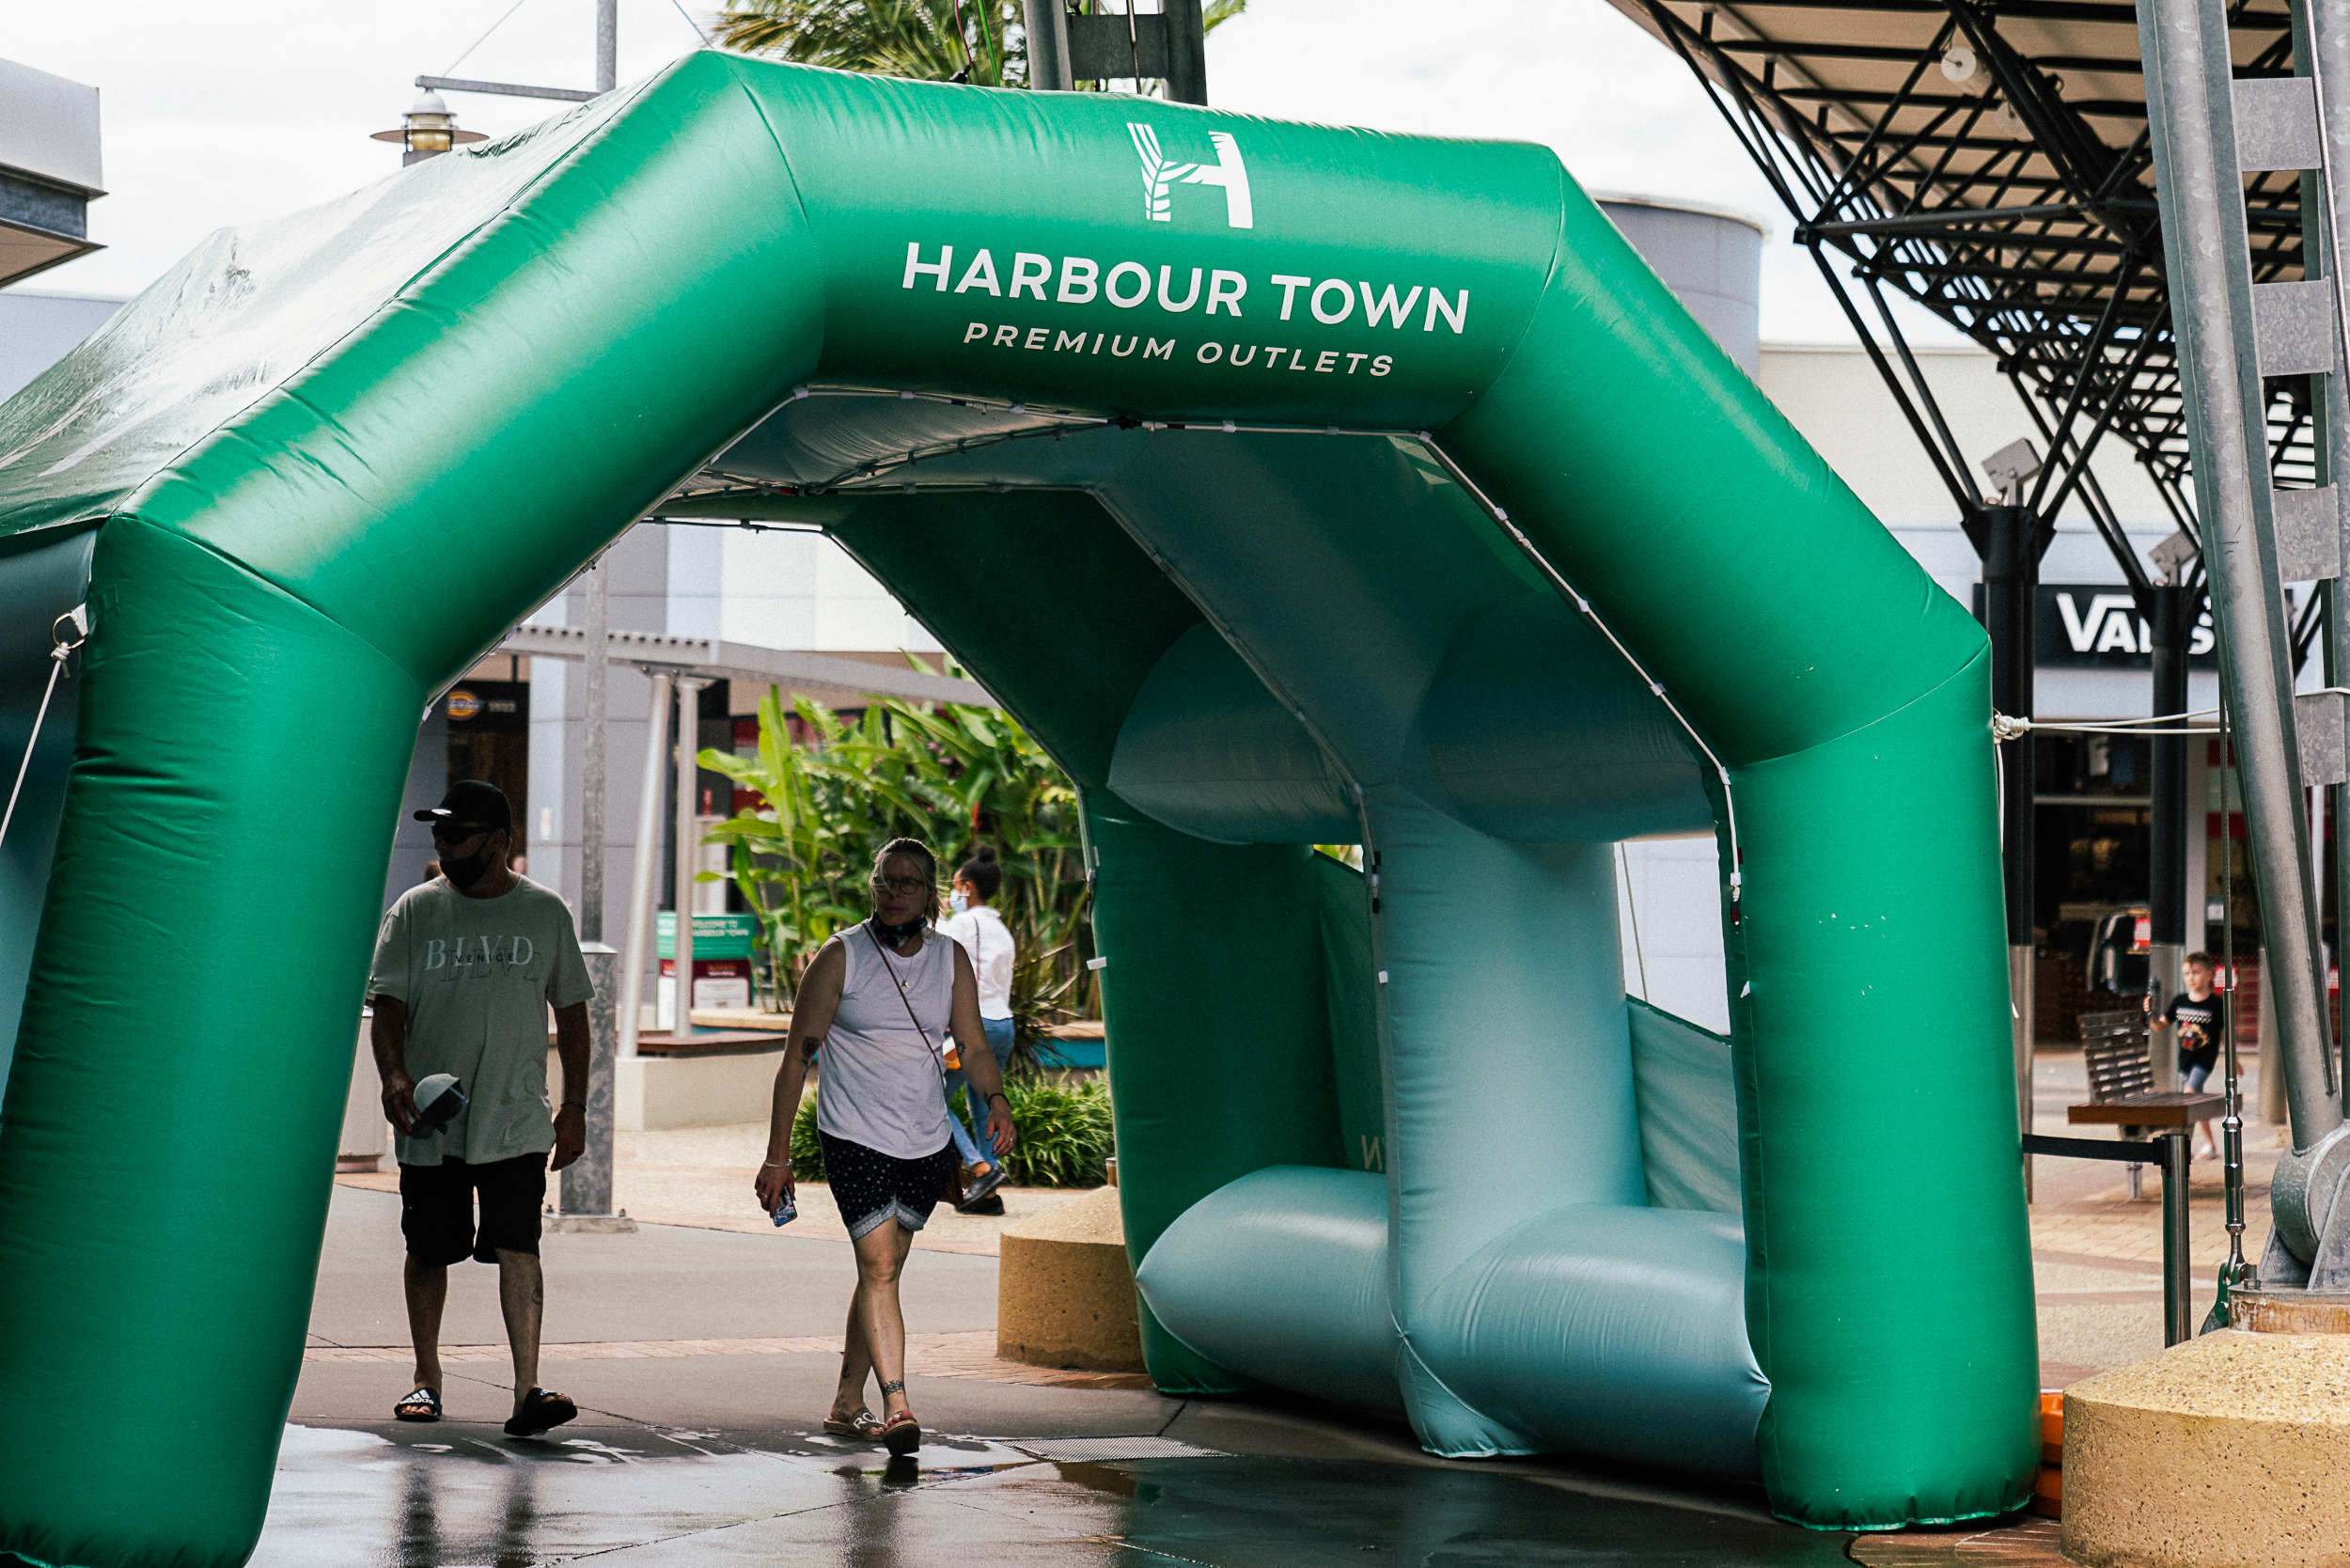 The misting tunnel was fully printed in the Harbour Town livery to ensure a strong brand identity and to convey to shoppers that harbour town is striving to make shopping as enjoyable an experience as possible, even in the summer heat.